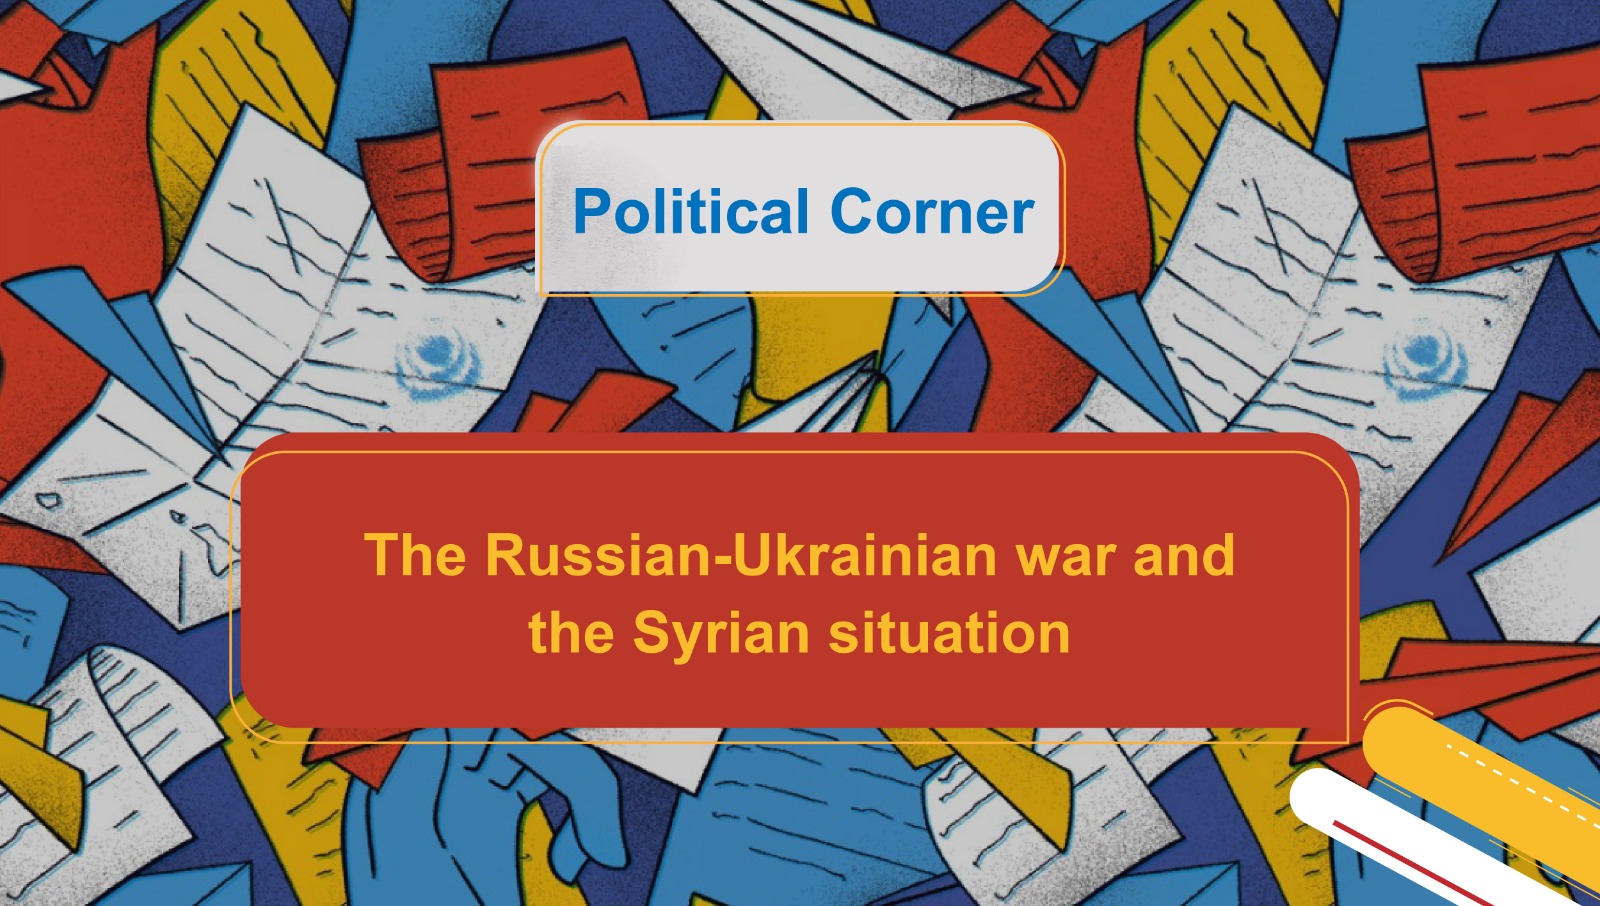 The Russian-Ukrainian war and the Syrian situation